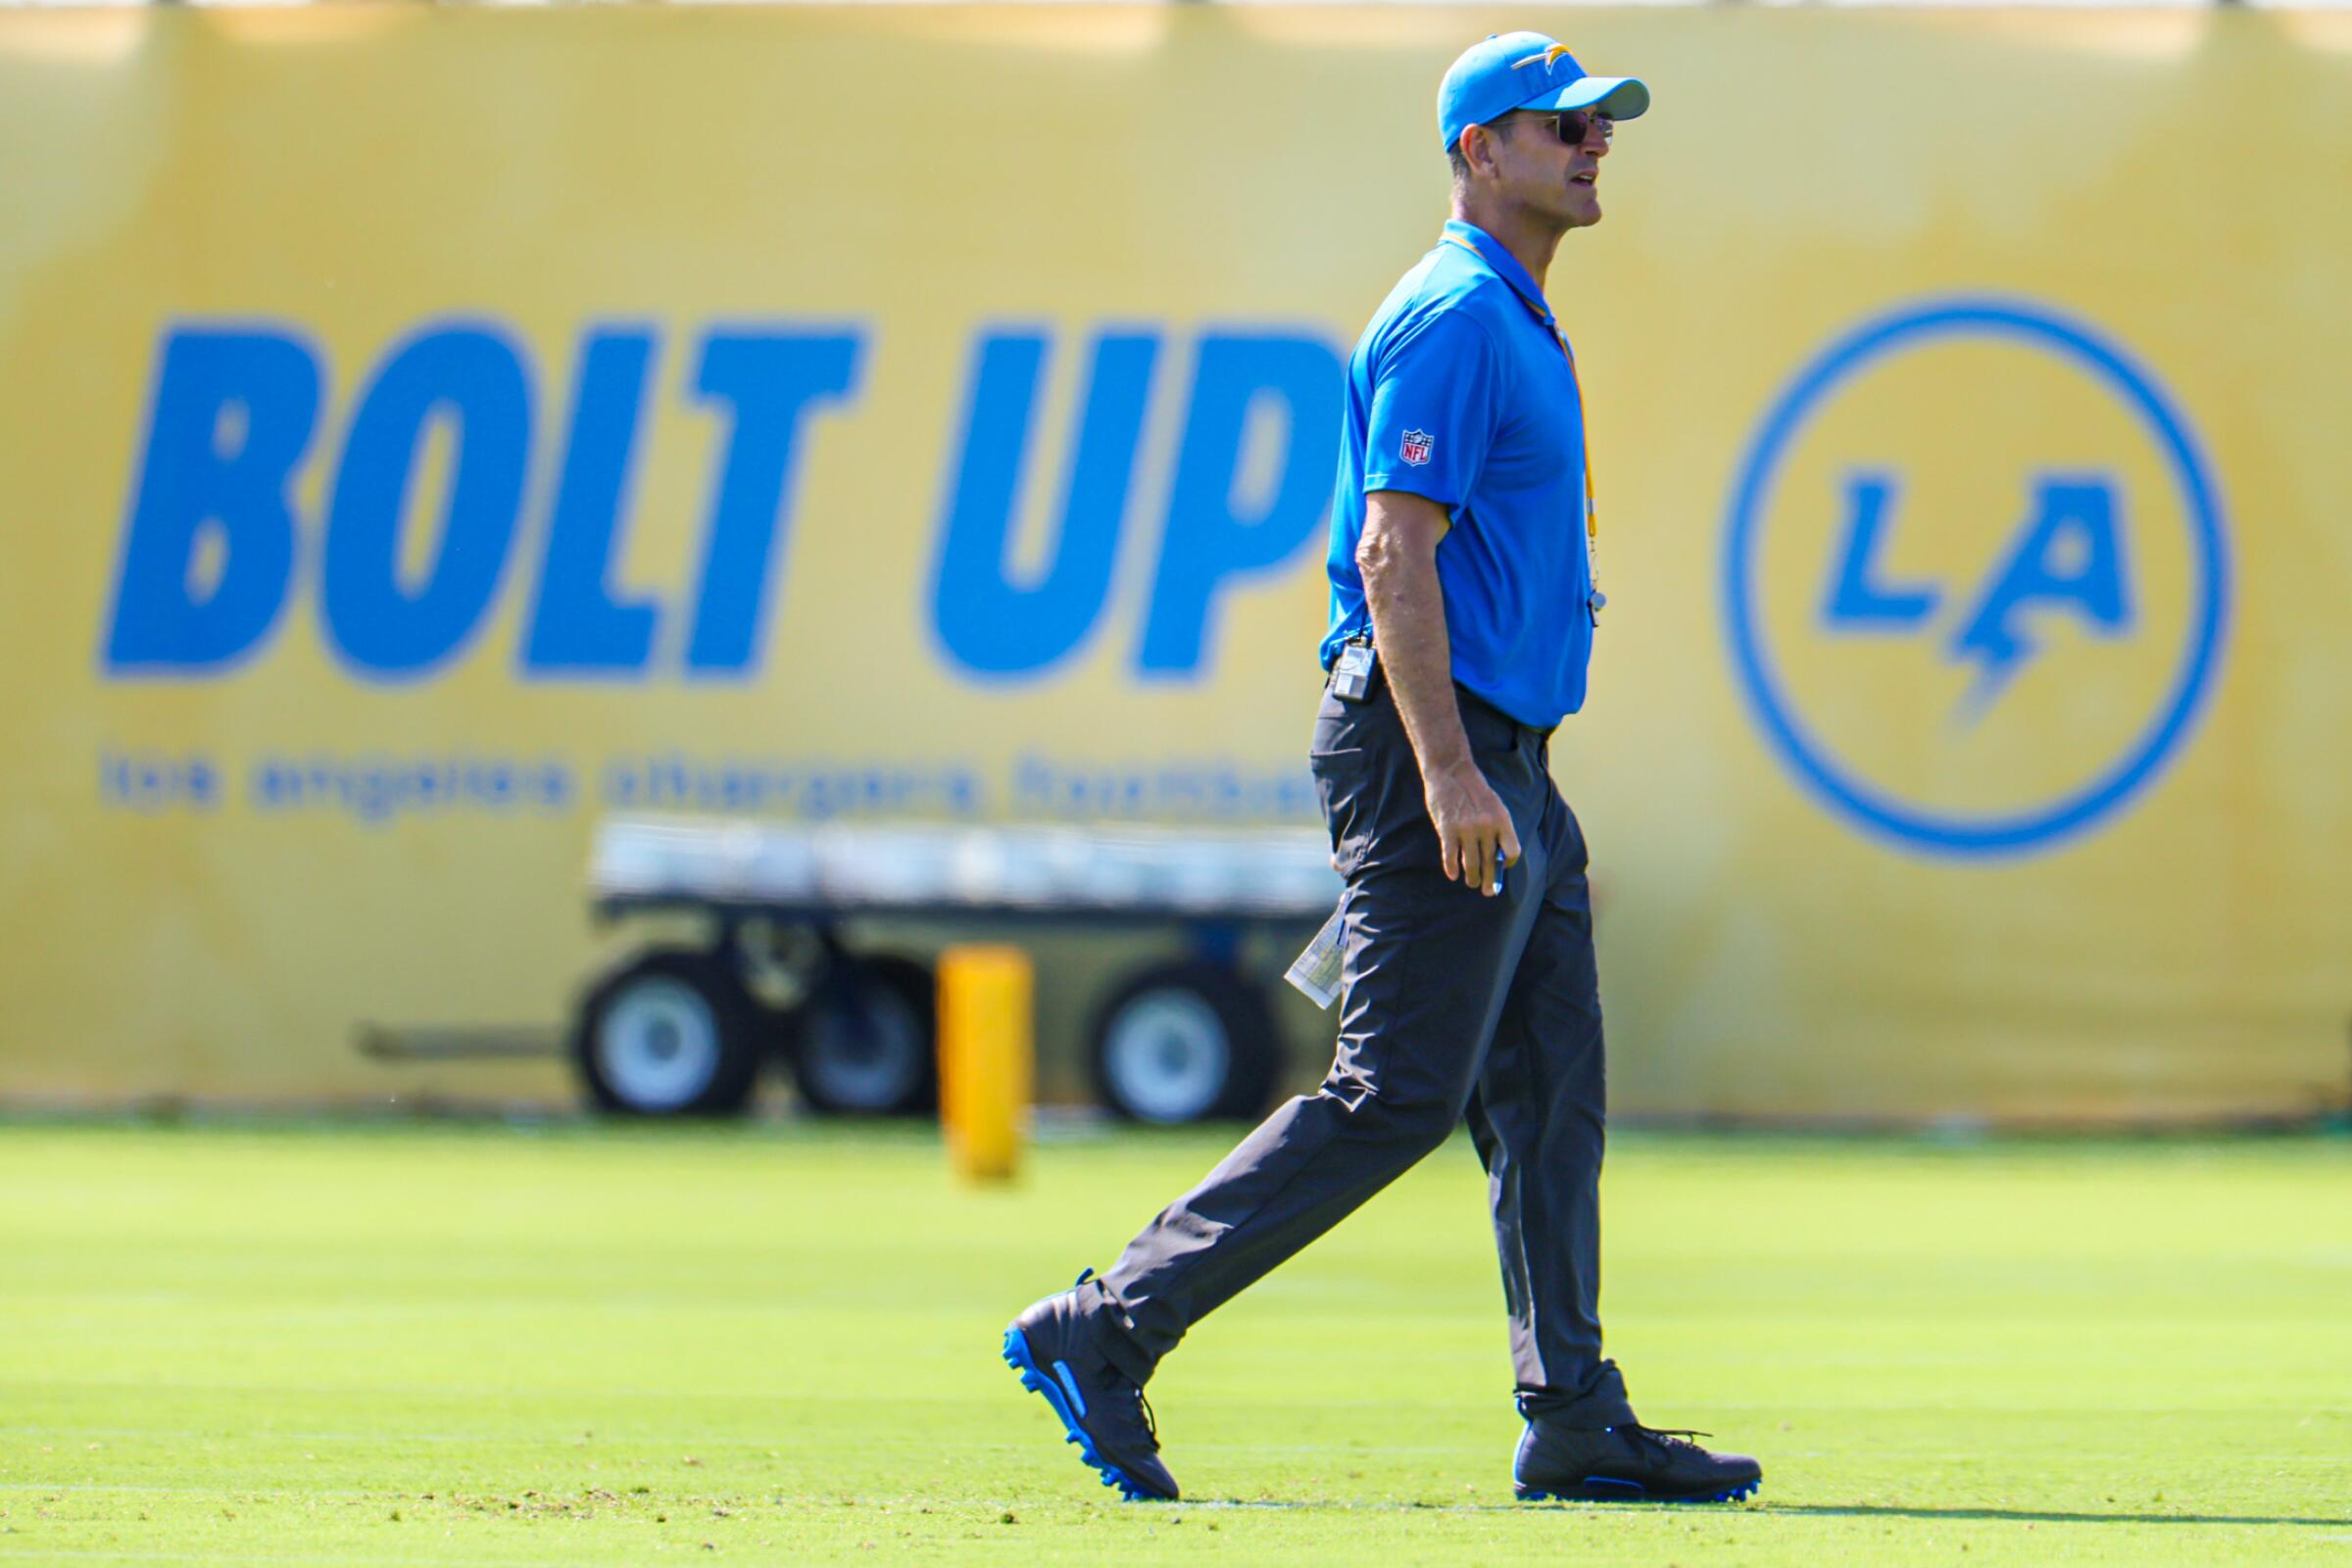 Chargers coach Jim Harbaugh walks the practice field sideline during training camp.